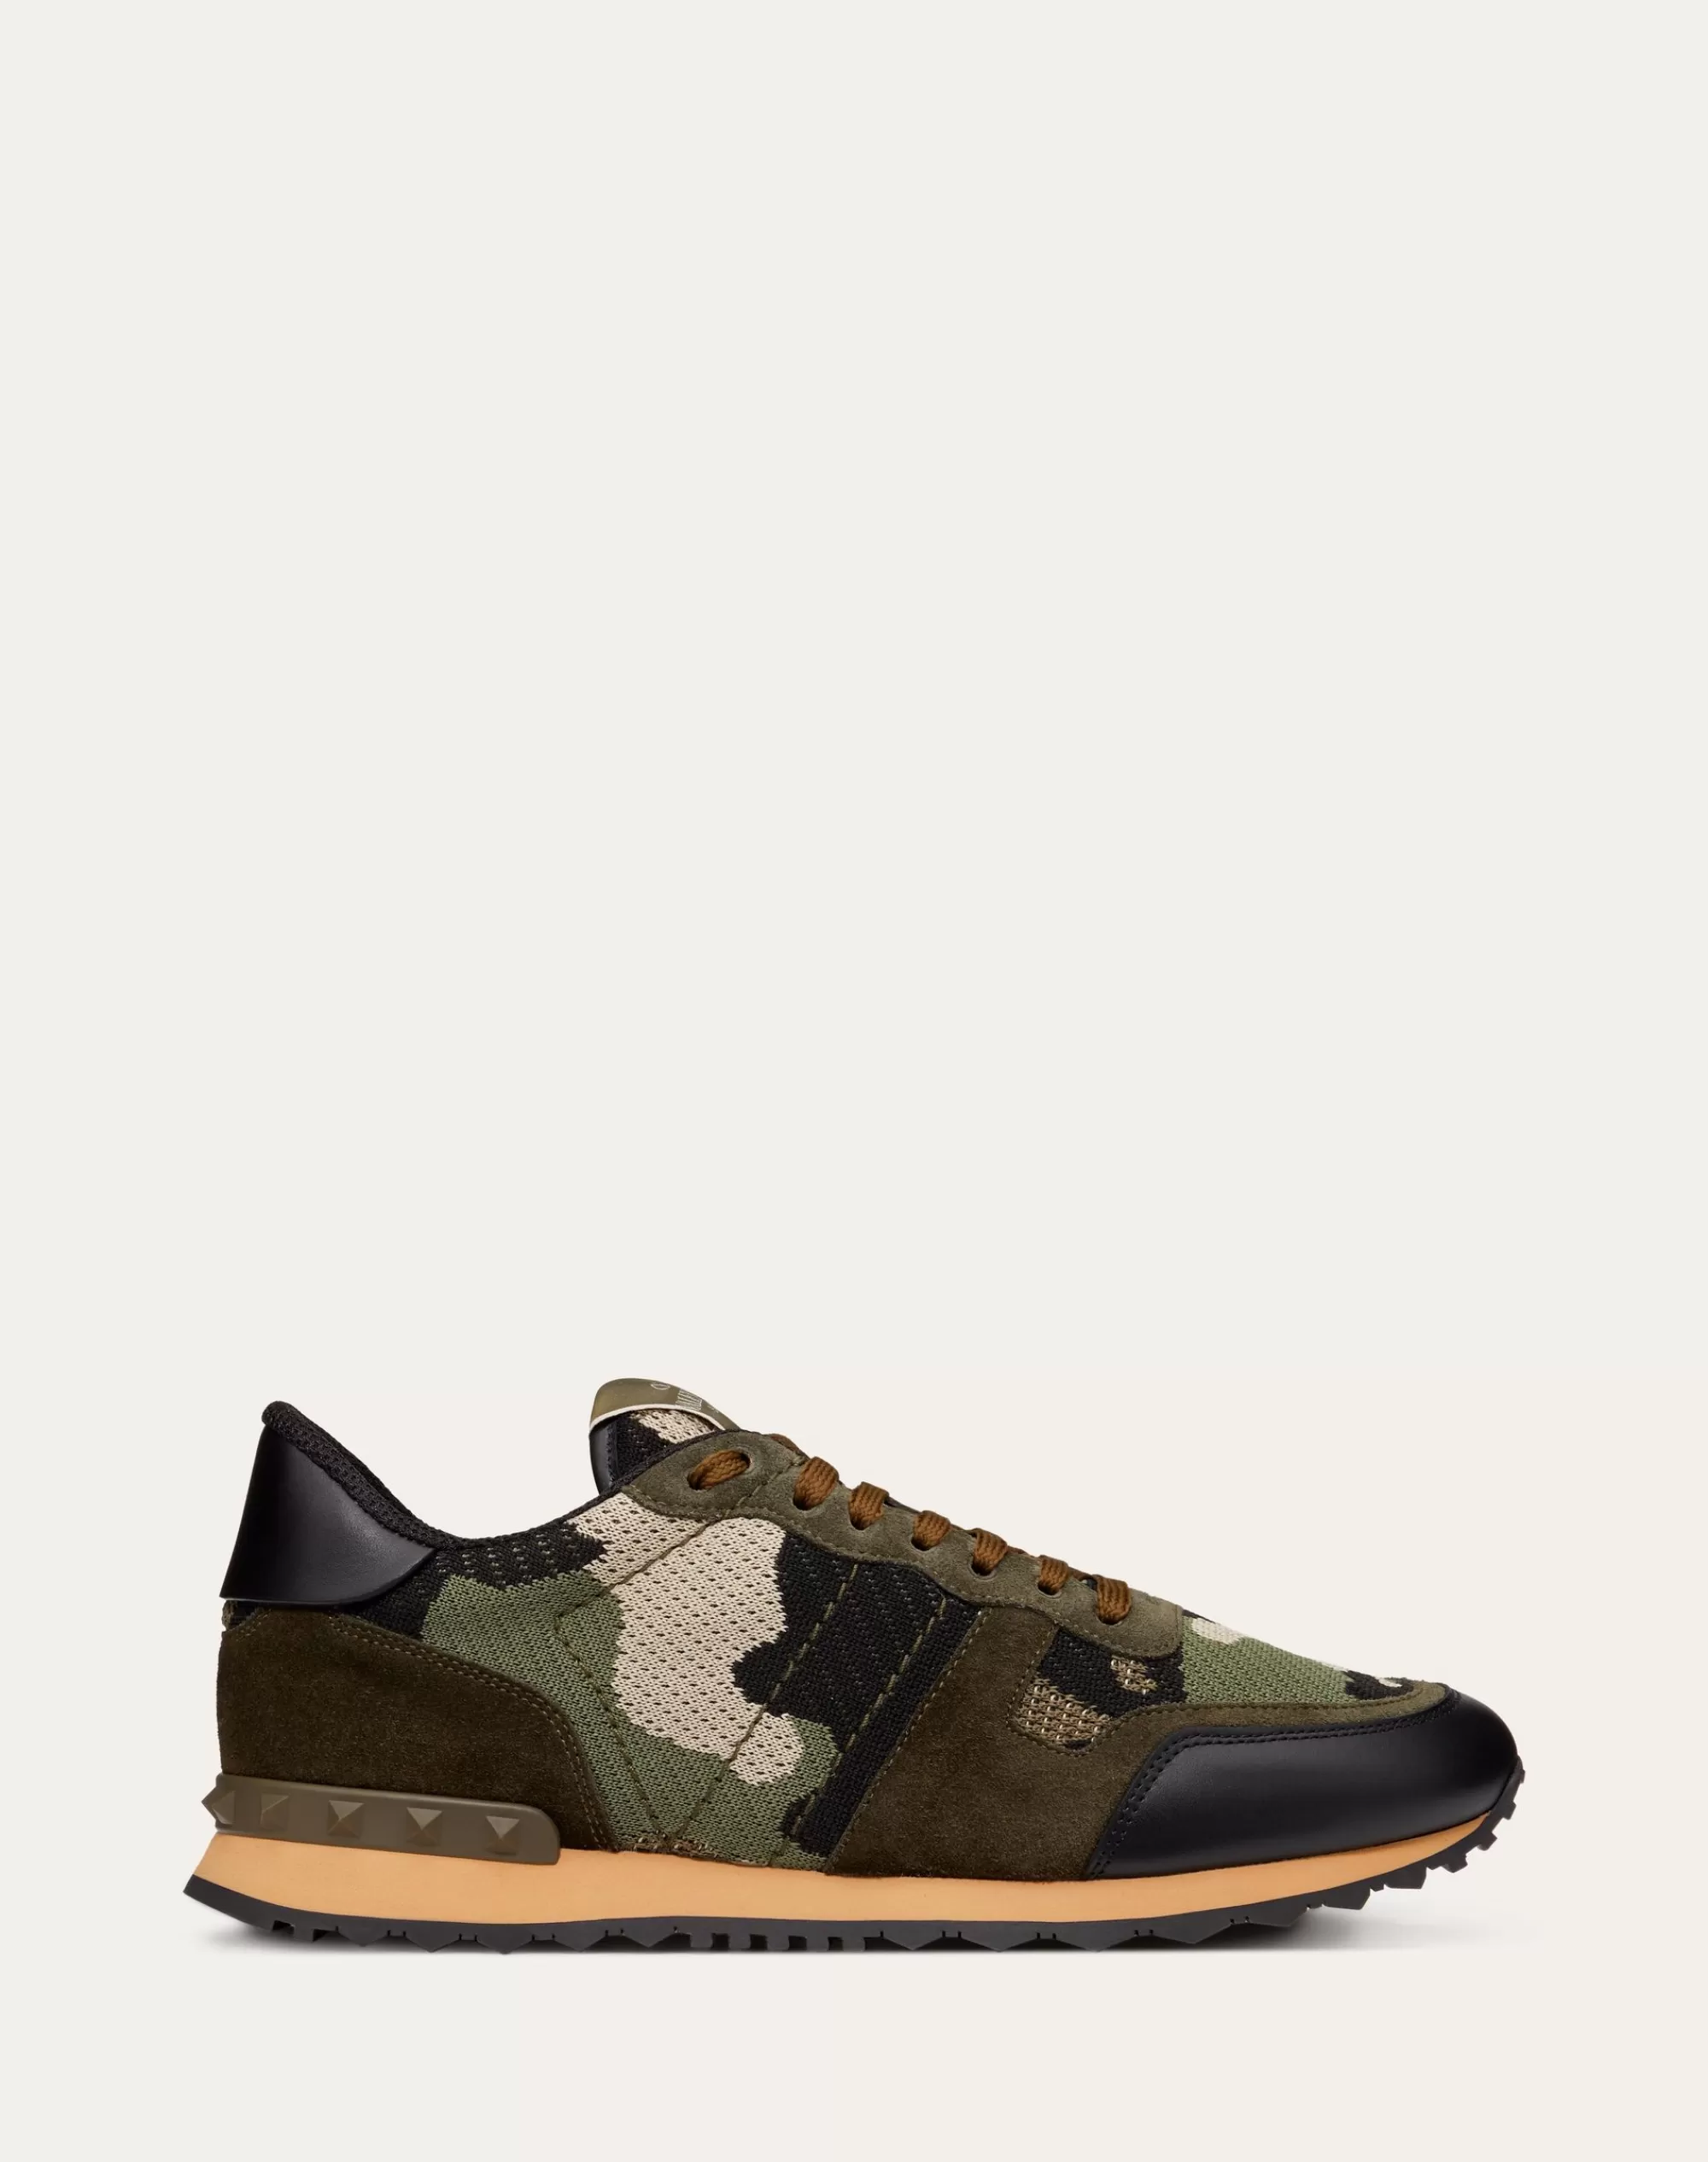 Valentino MESH FABRIC CAMOUFLAGE ROCKRUNNER SNEAKER Discount